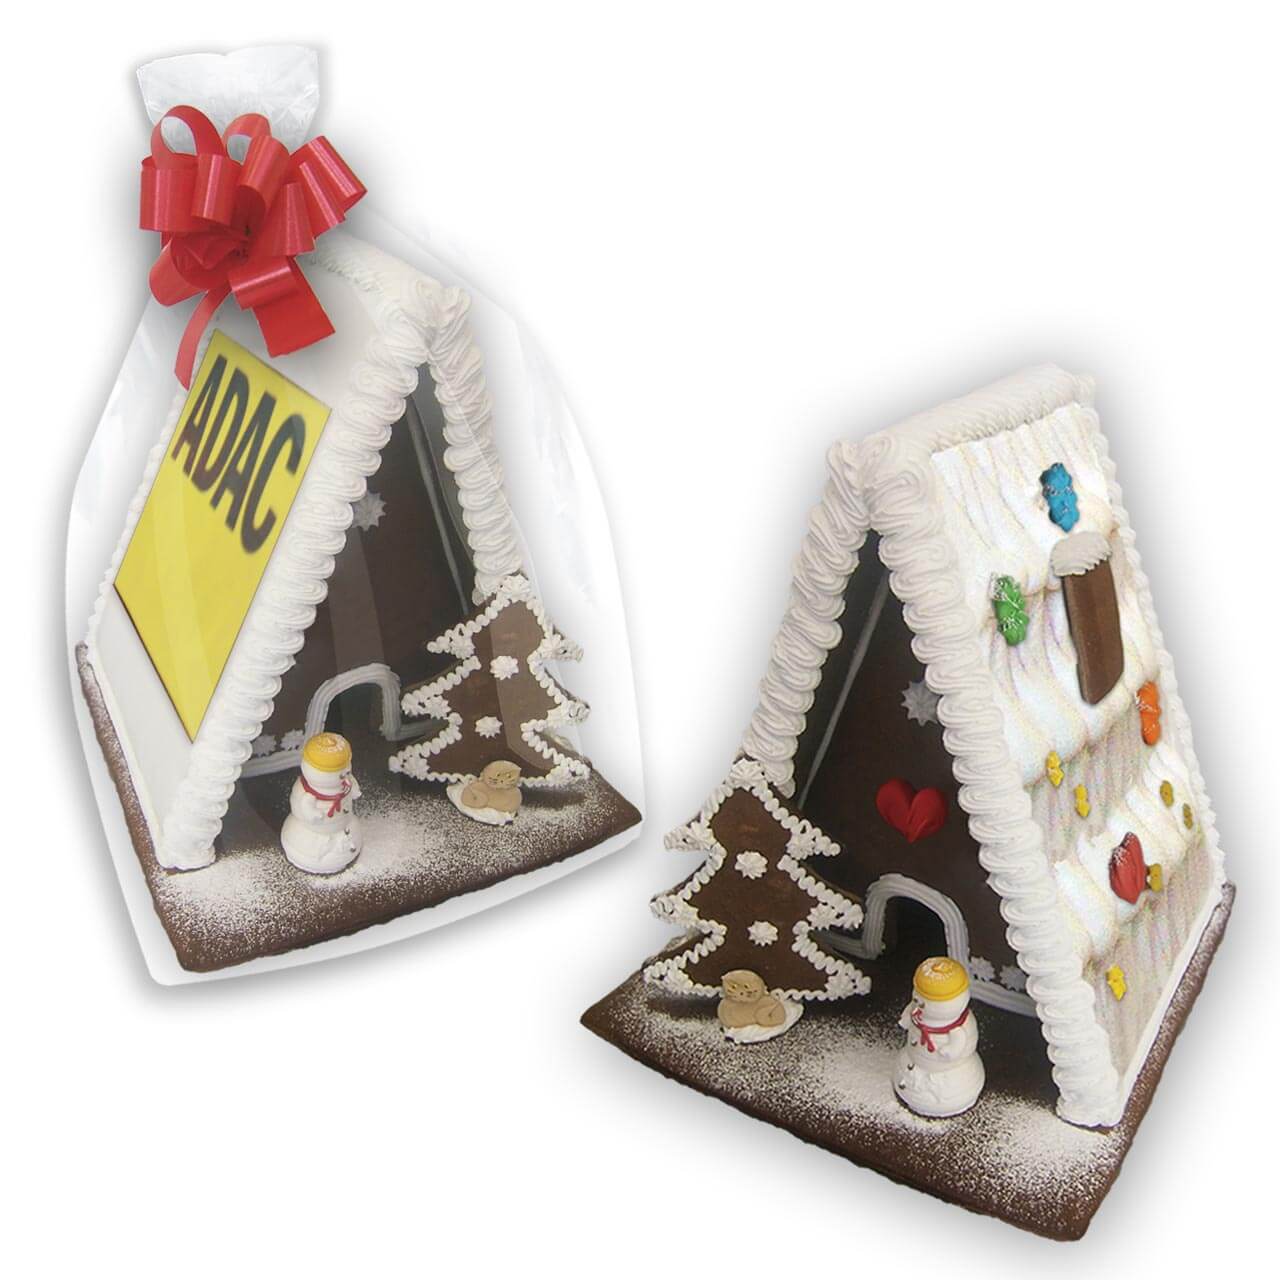 Personalized Gingerbread witch house with logo - extra large